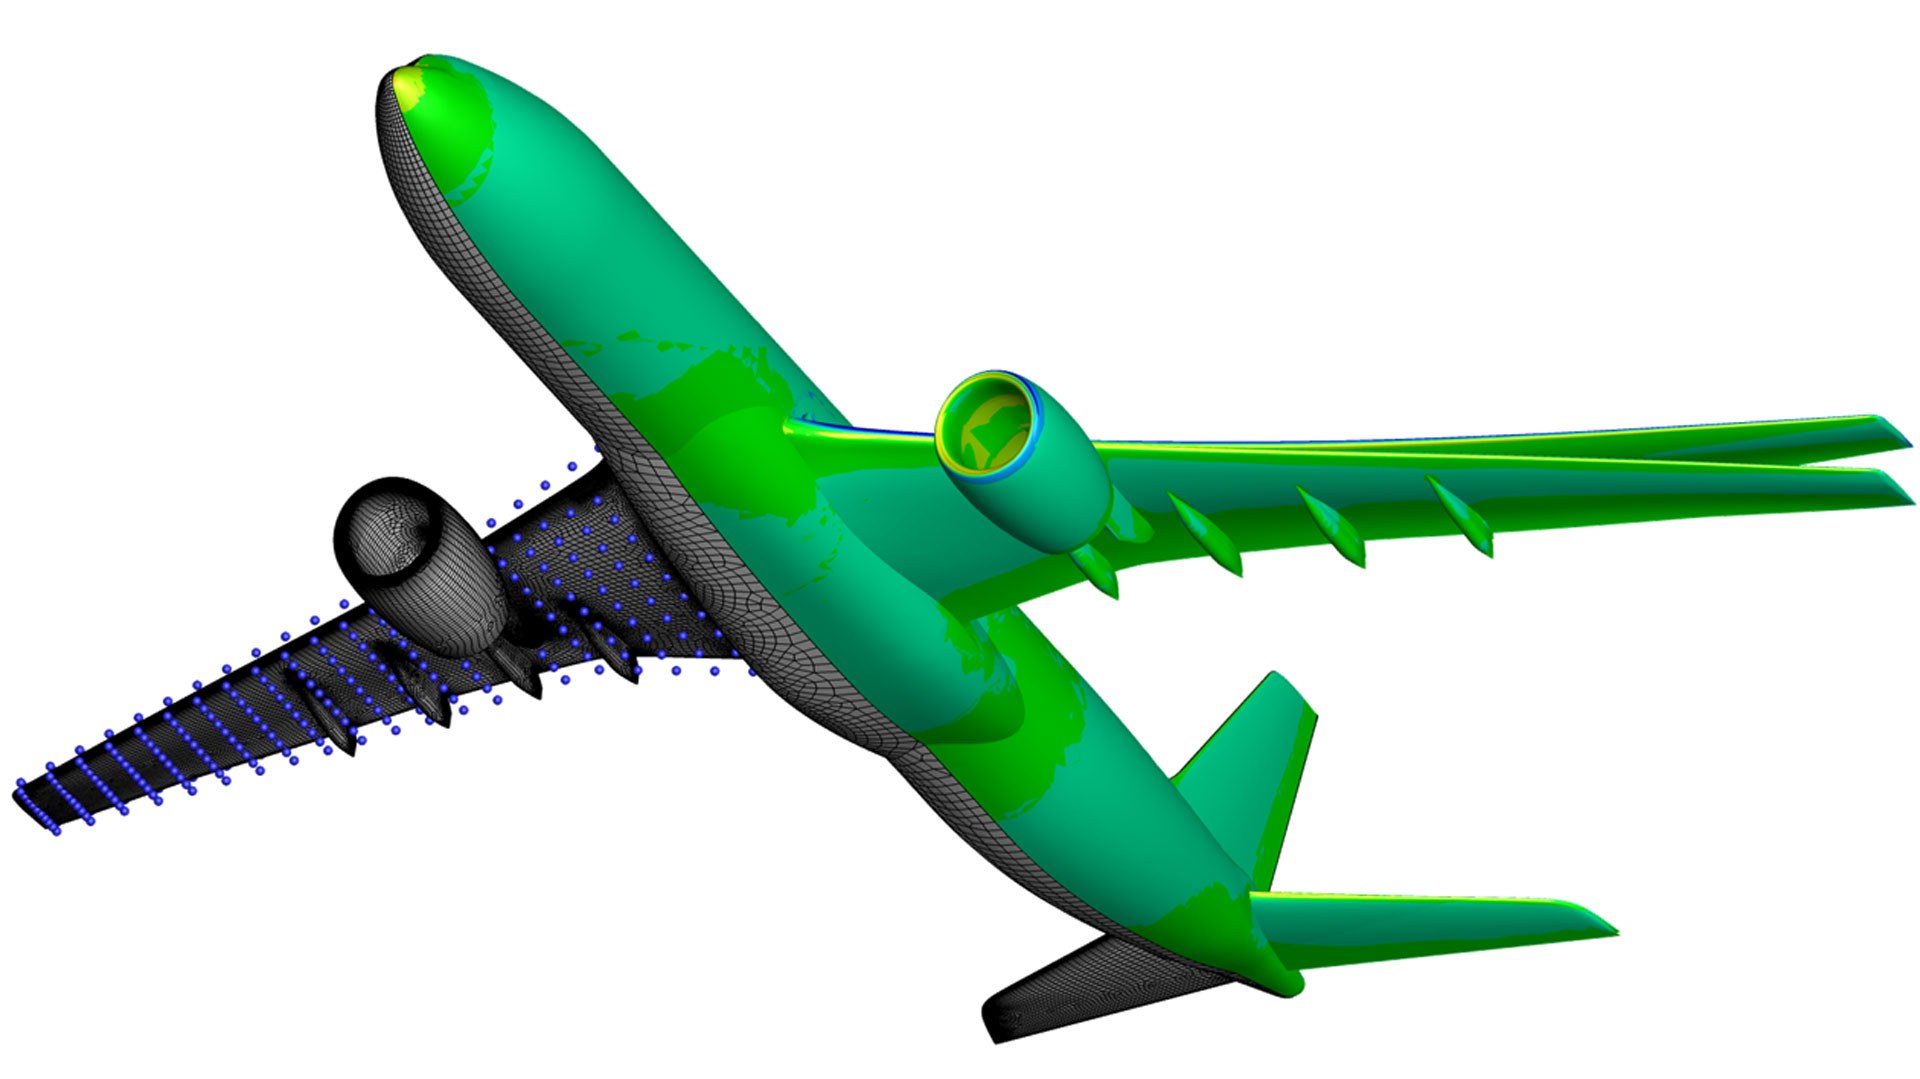 Configuration of the digital research aircraft